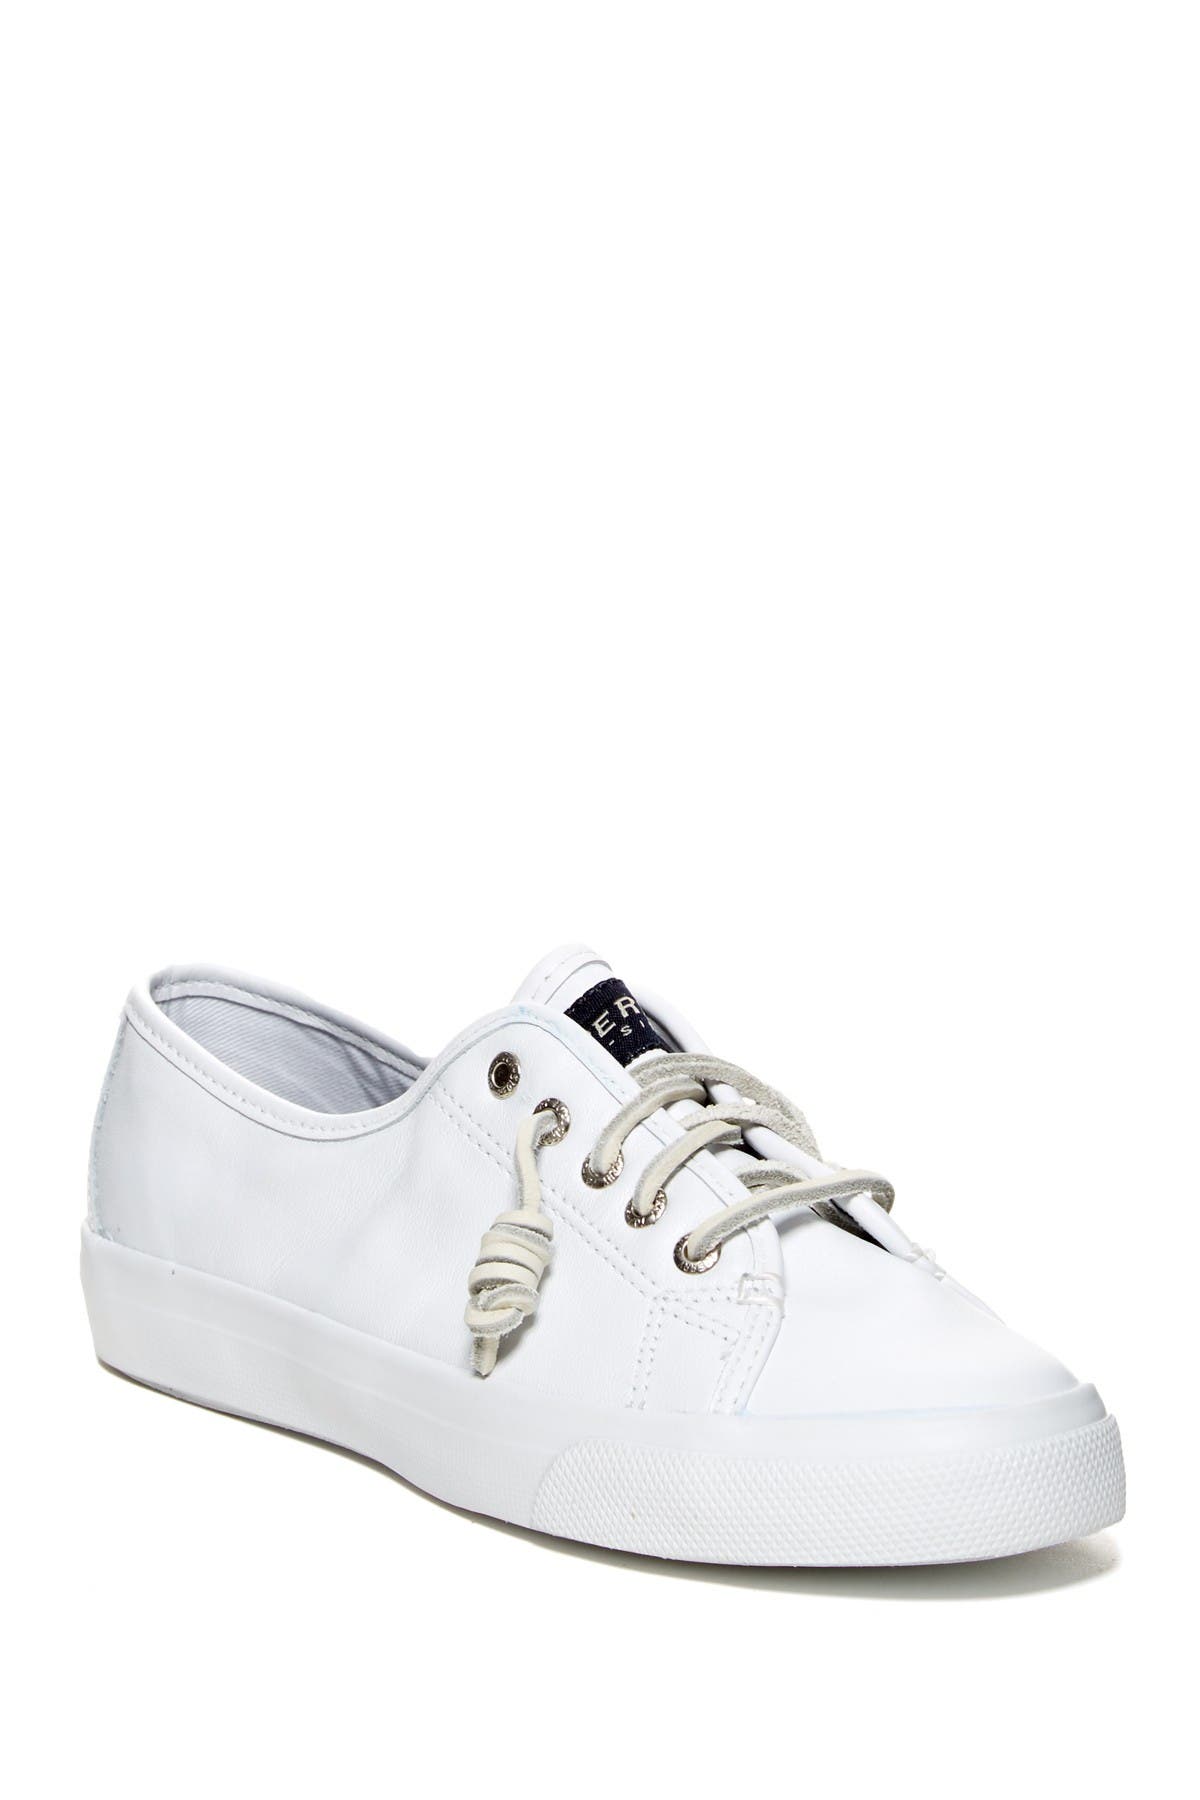 white sperry boat shoes